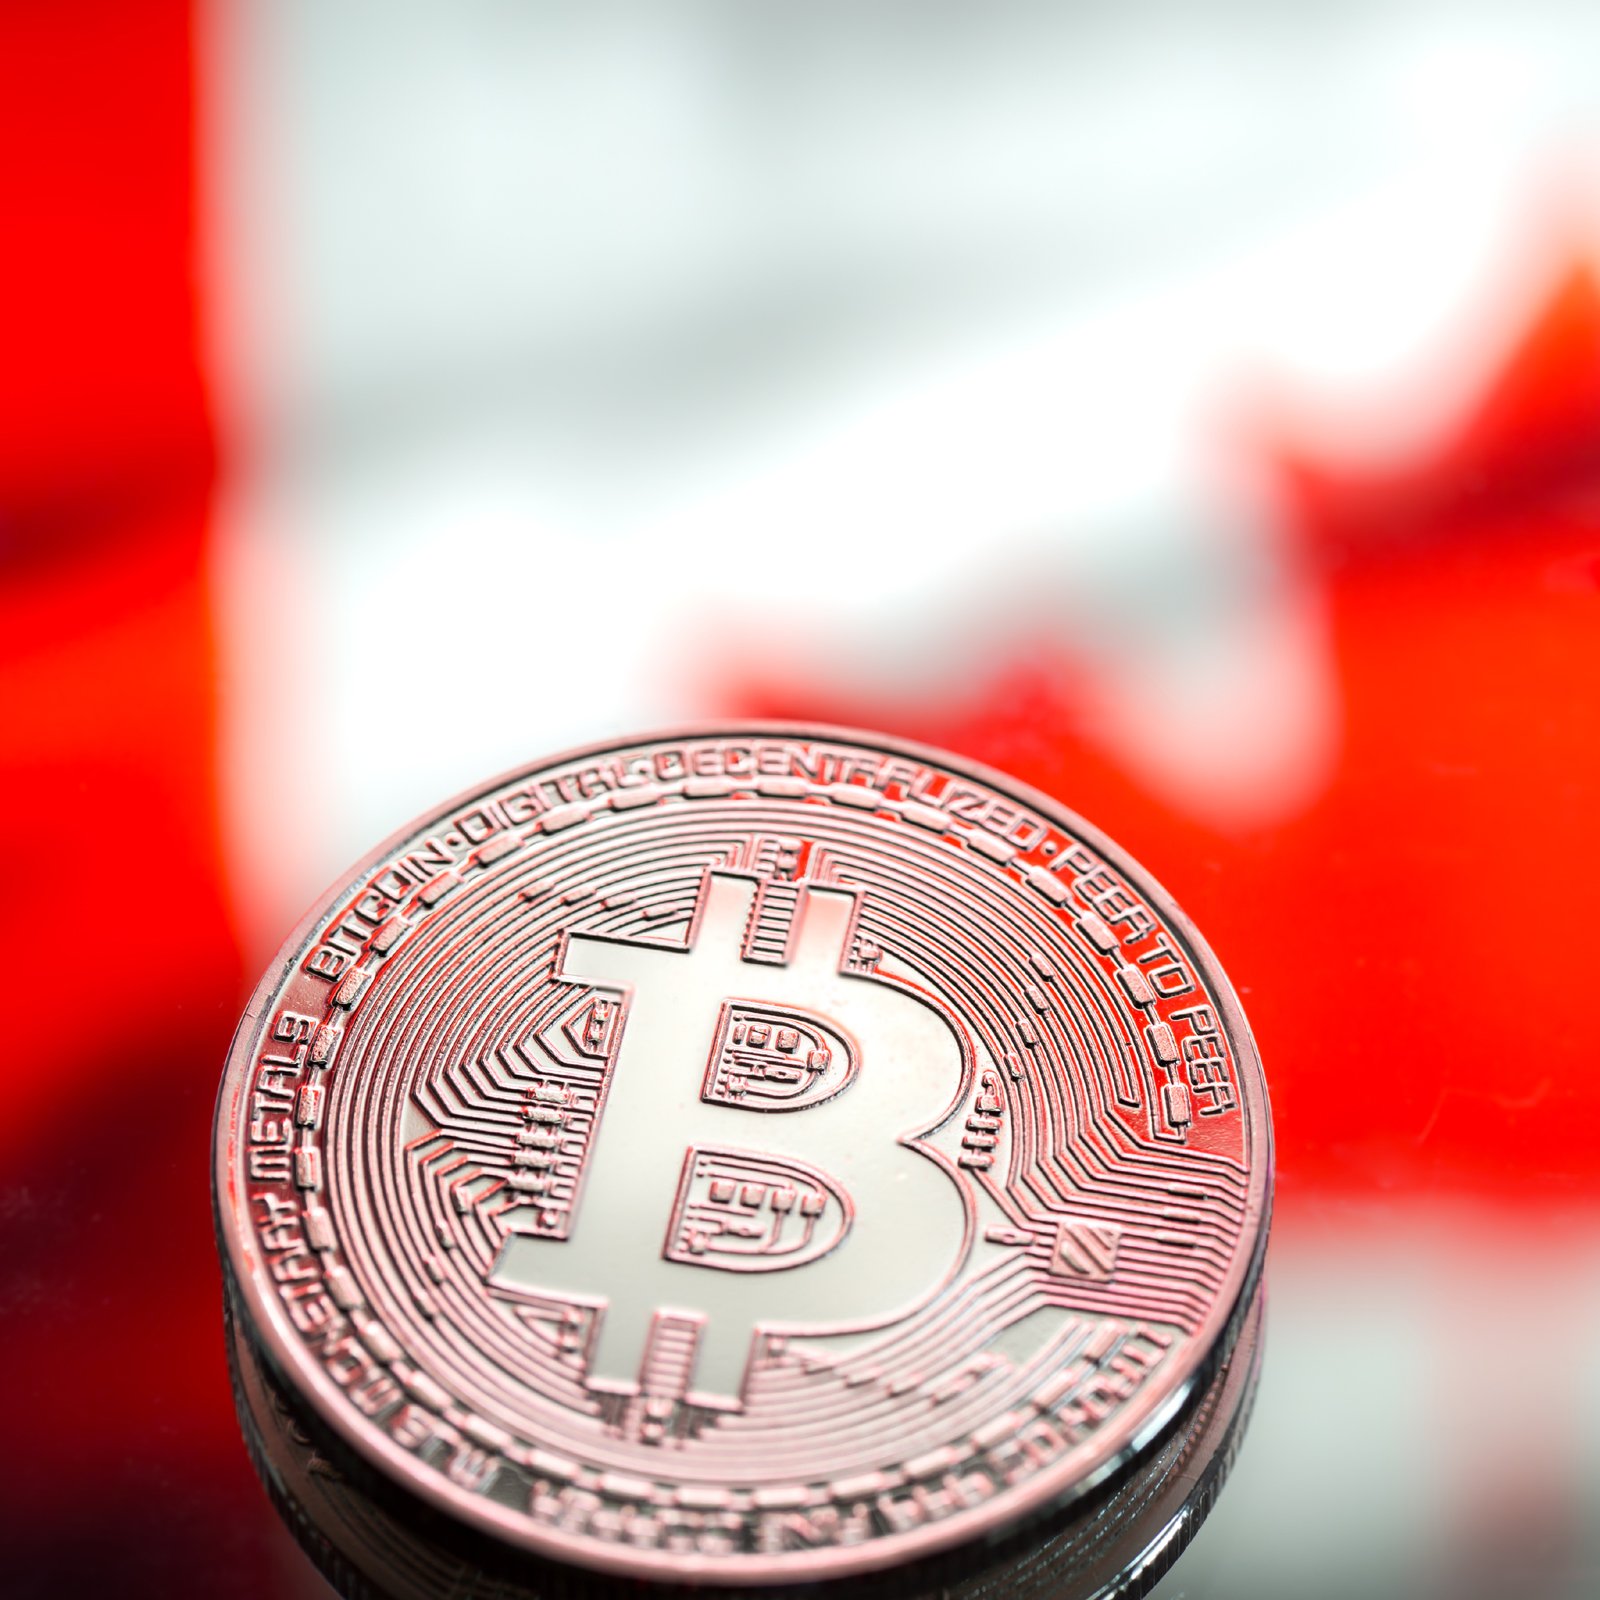 How To Trade Bitcoin In Canada - Trade Bitcoins In Canadawww Galerie Boris Com : Cex.io is an easy exchange to use and is known to be reliable, but bear in mind that it has higher fees.